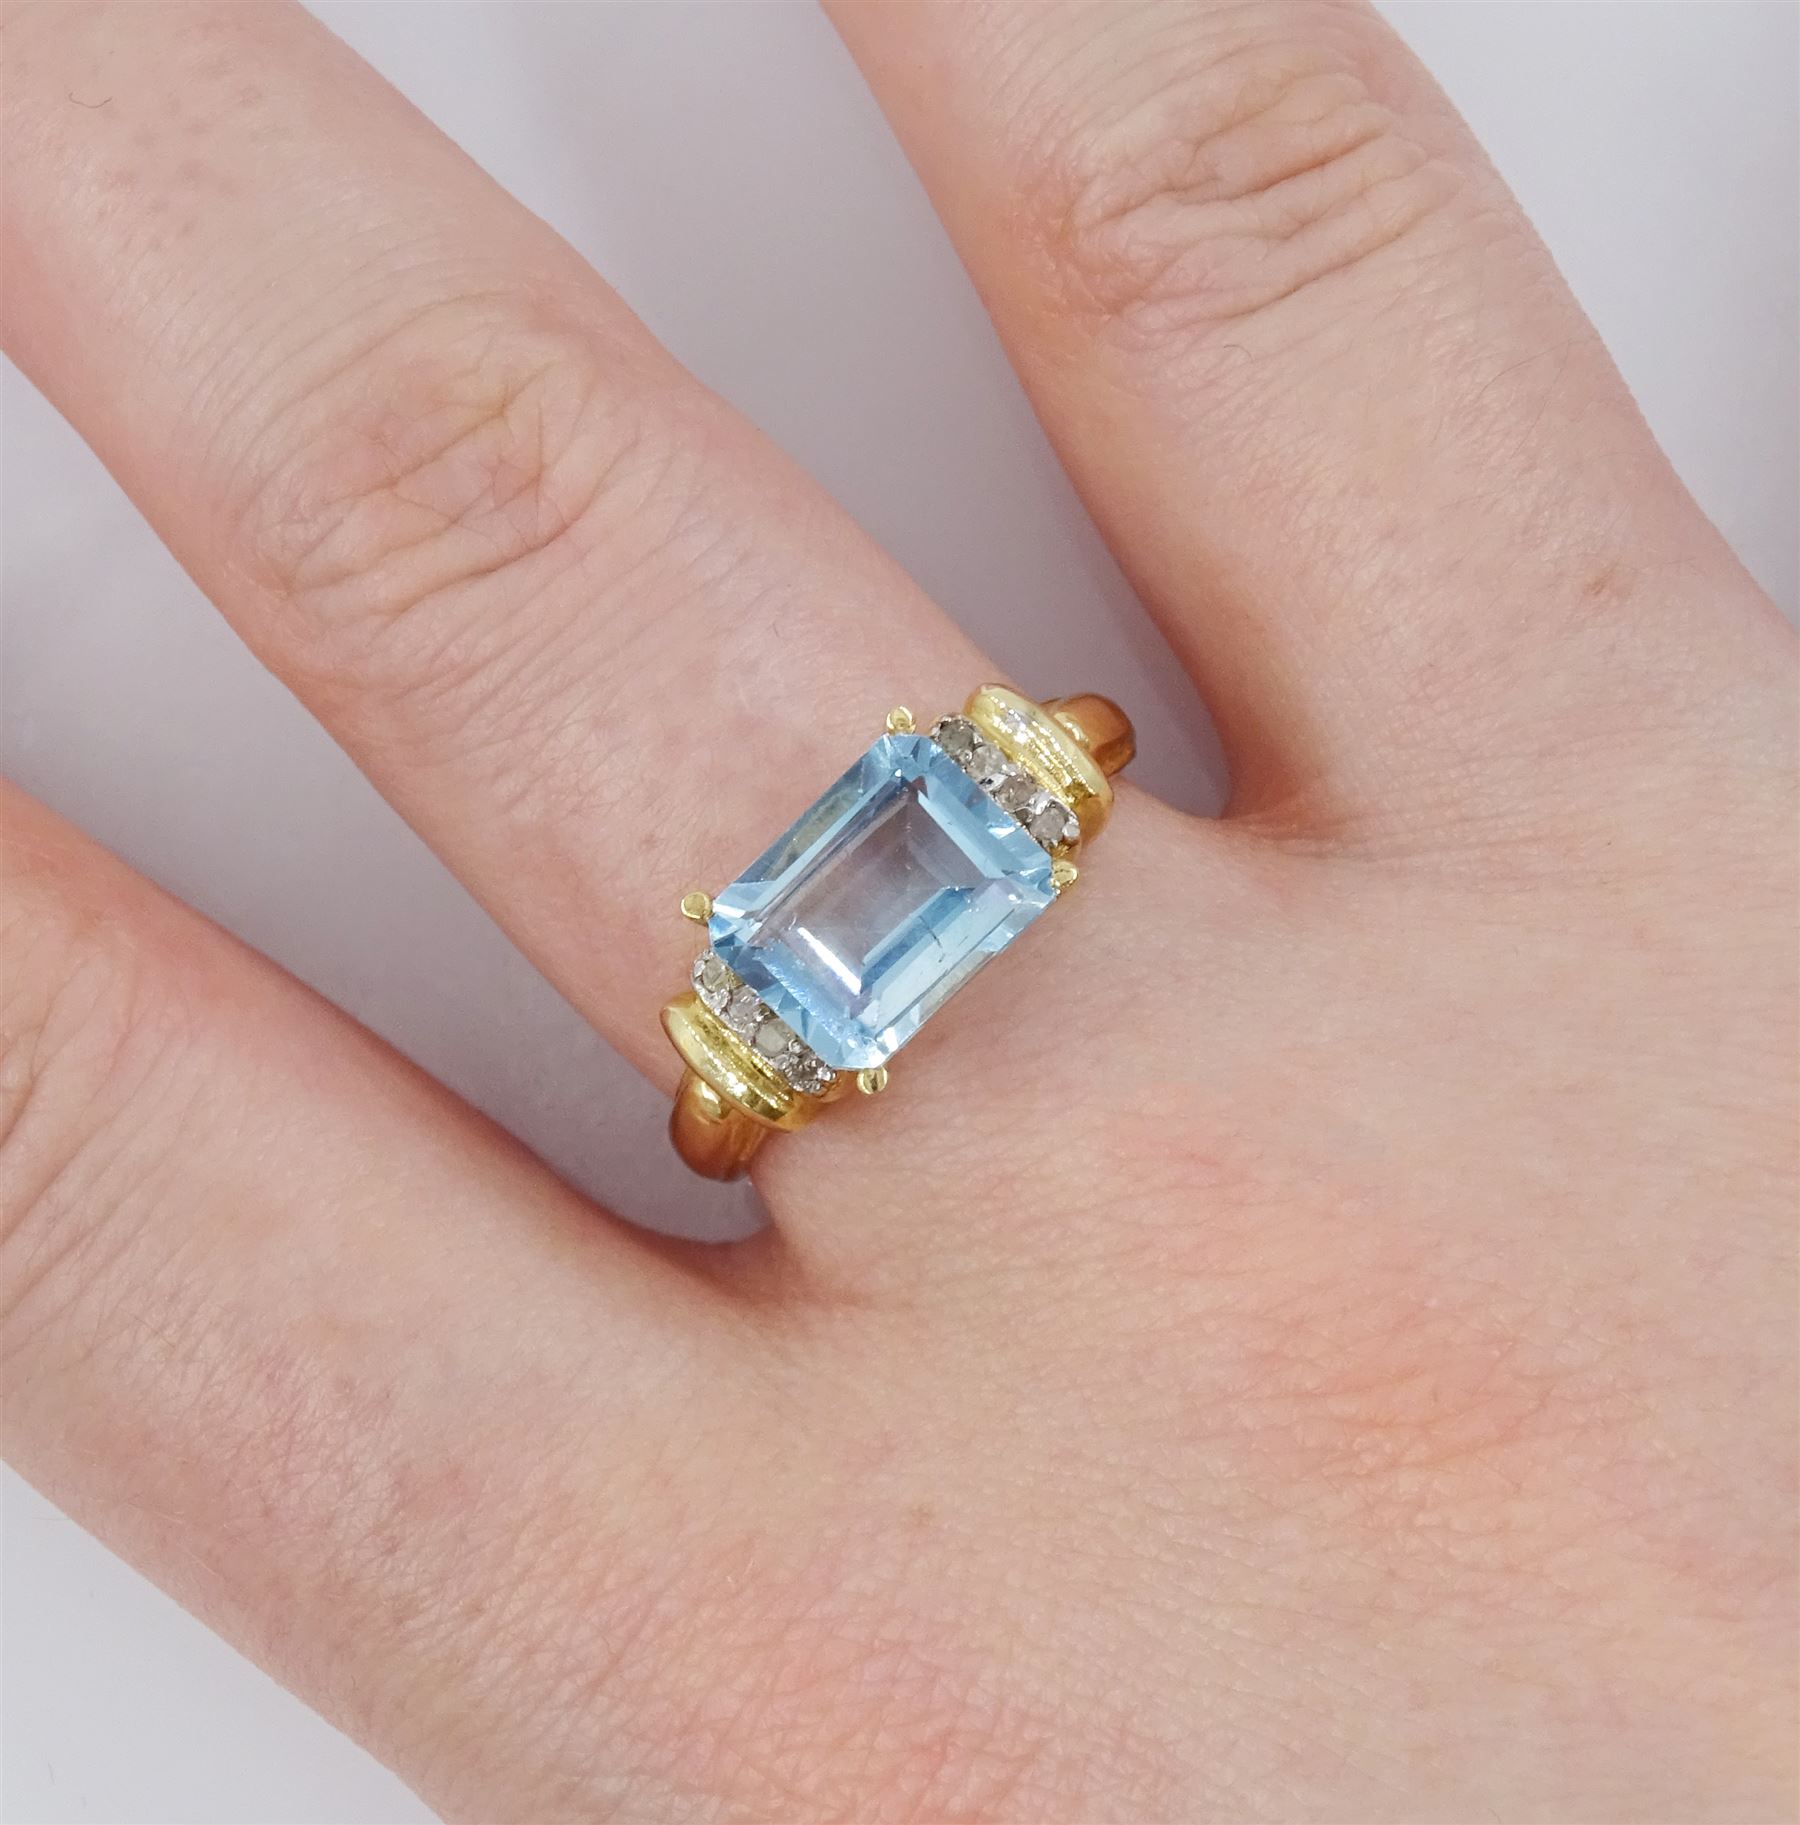 Gold emerald cut blue topaz and diamond ring - Image 2 of 4